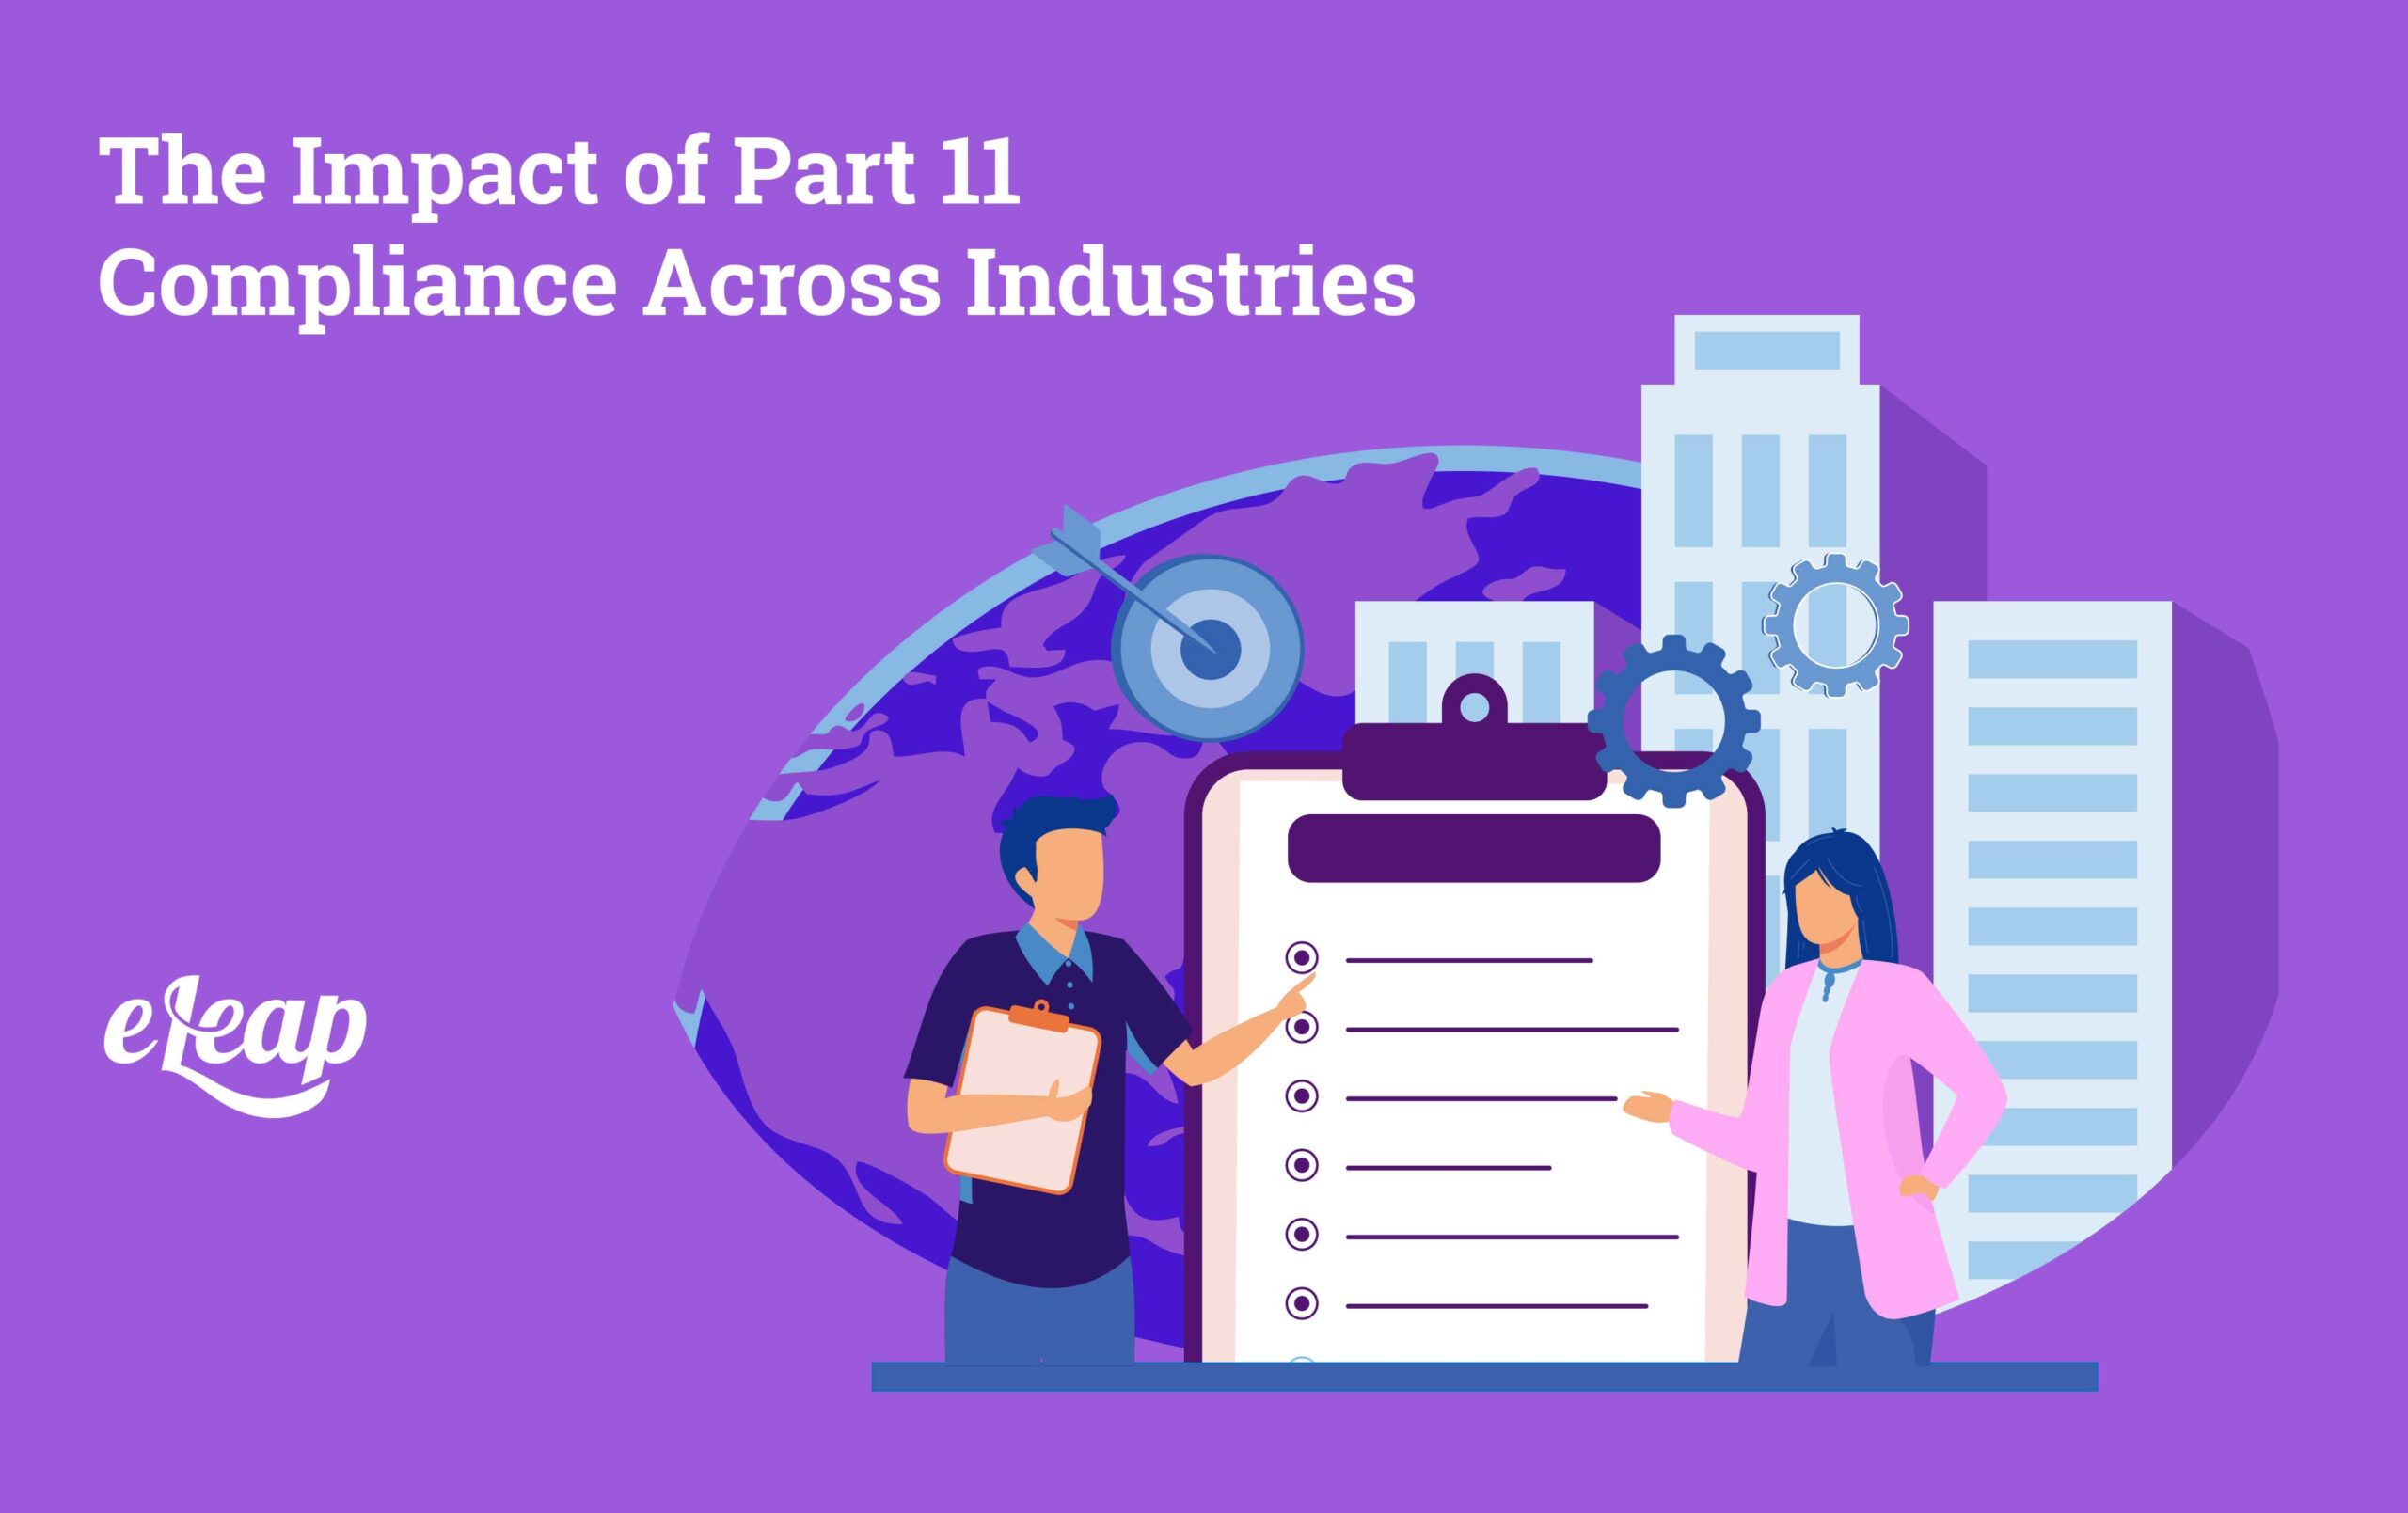 The Impact of Part 11 Compliance Across Industries